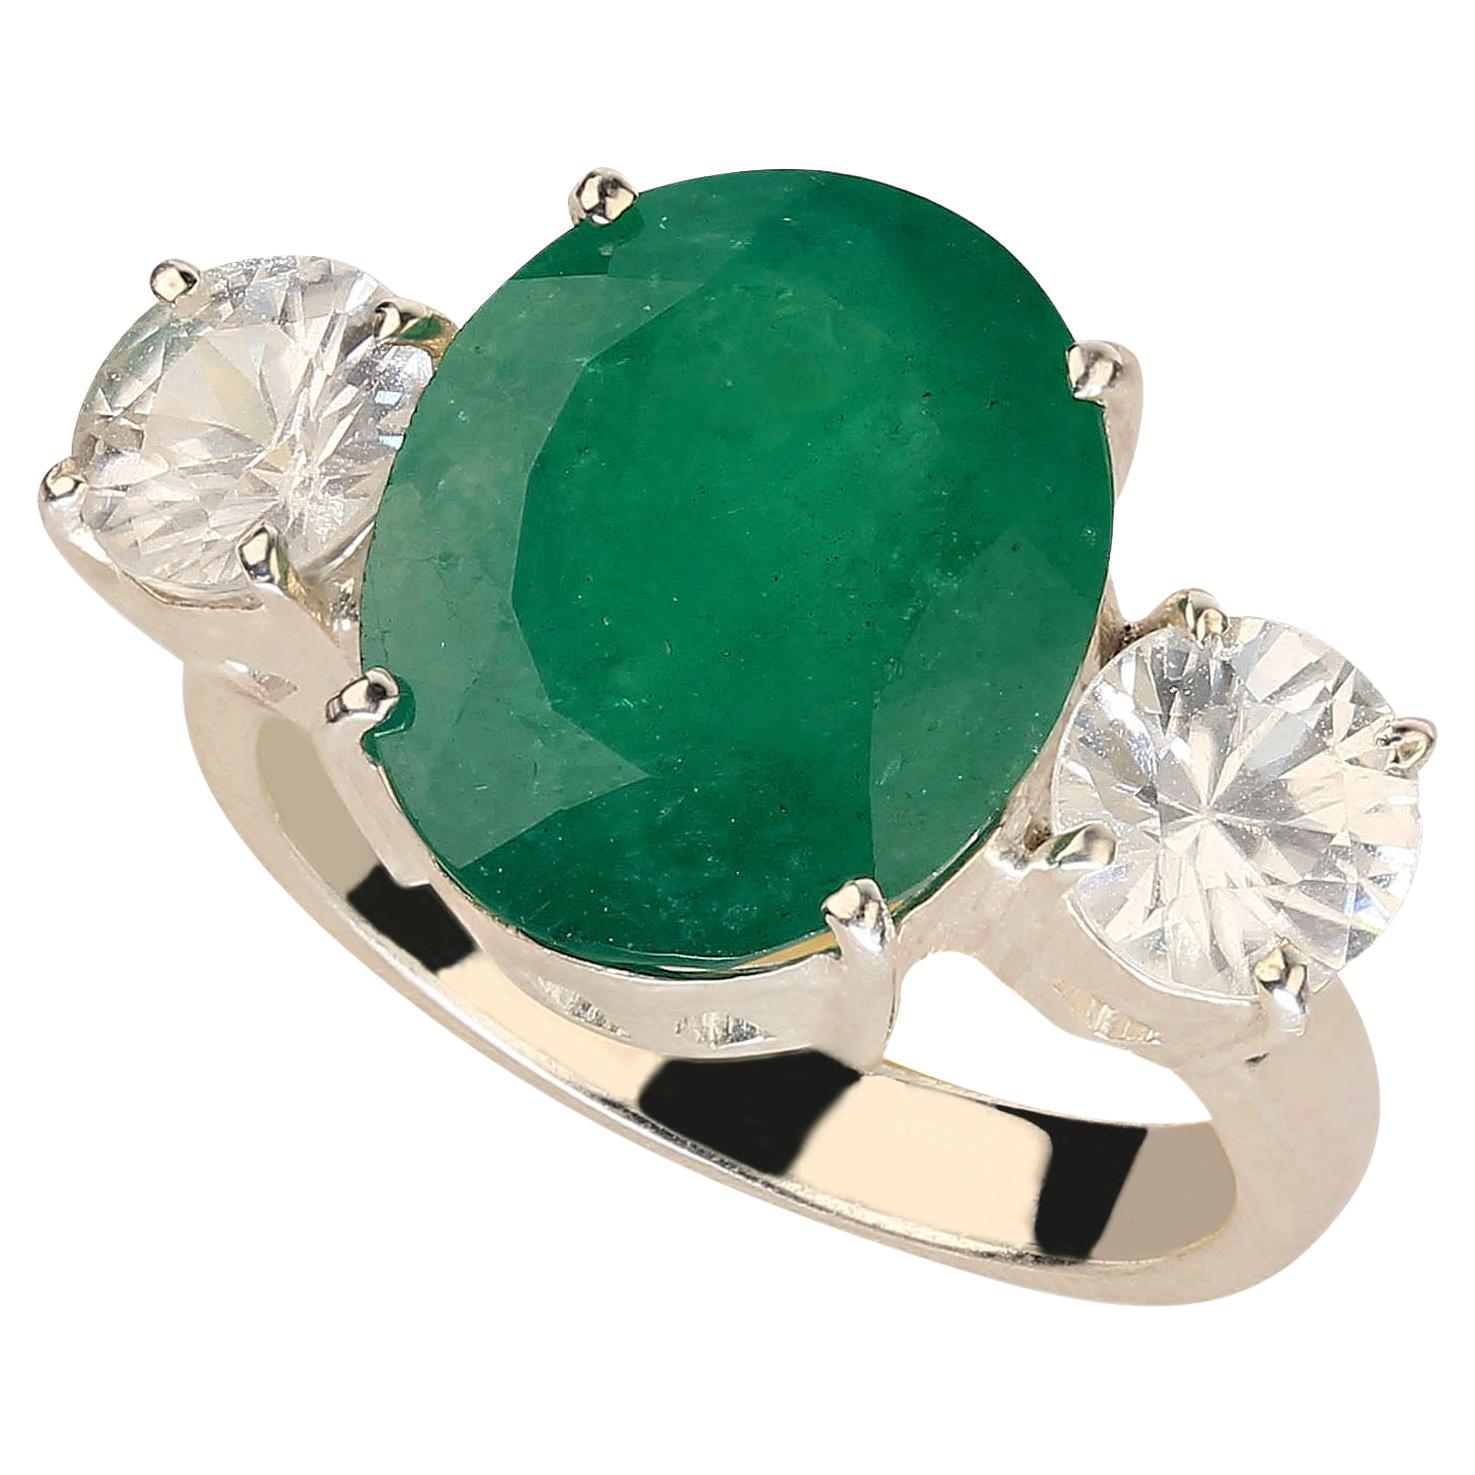 Shop LC Delivering Joy Statement Ring Green Glass White Cubic Zirconia CZ Gift Jewelry for Women Size 9 Ct 8.3